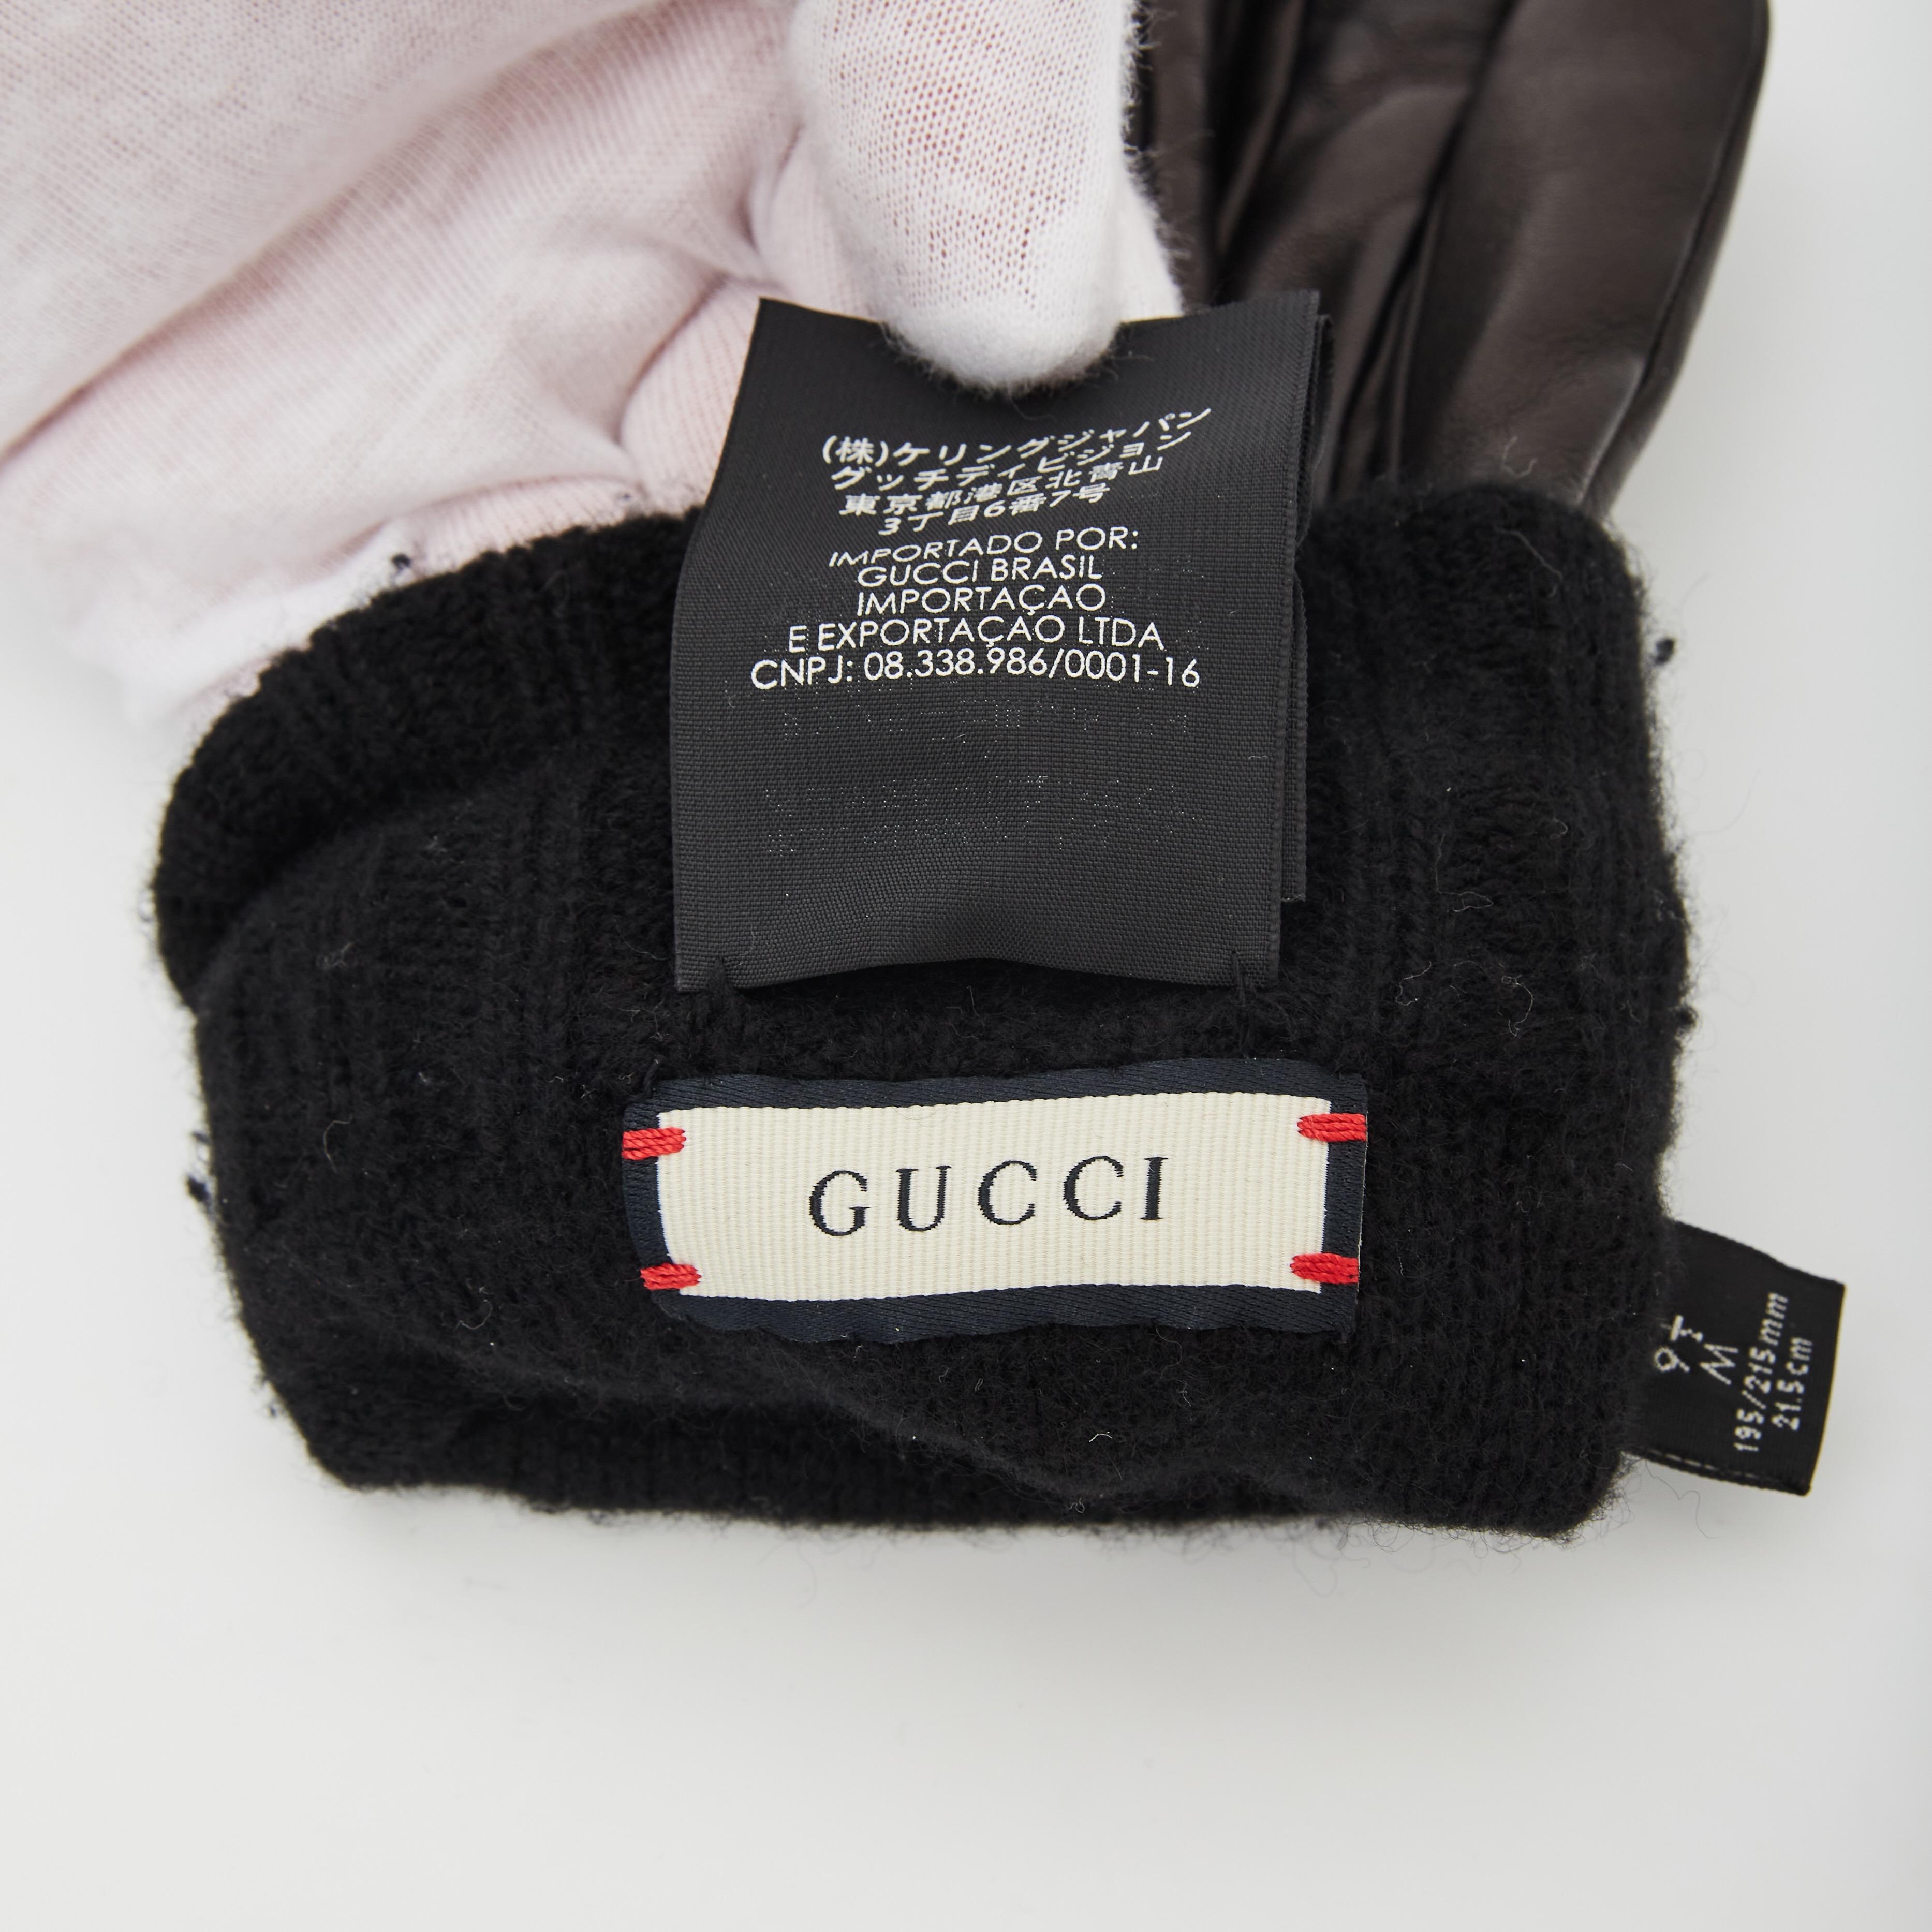 Gucci Black Nappa Cashmere Neo Tiger Gloves 9.5/M (524047) In New Condition For Sale In Montreal, Quebec